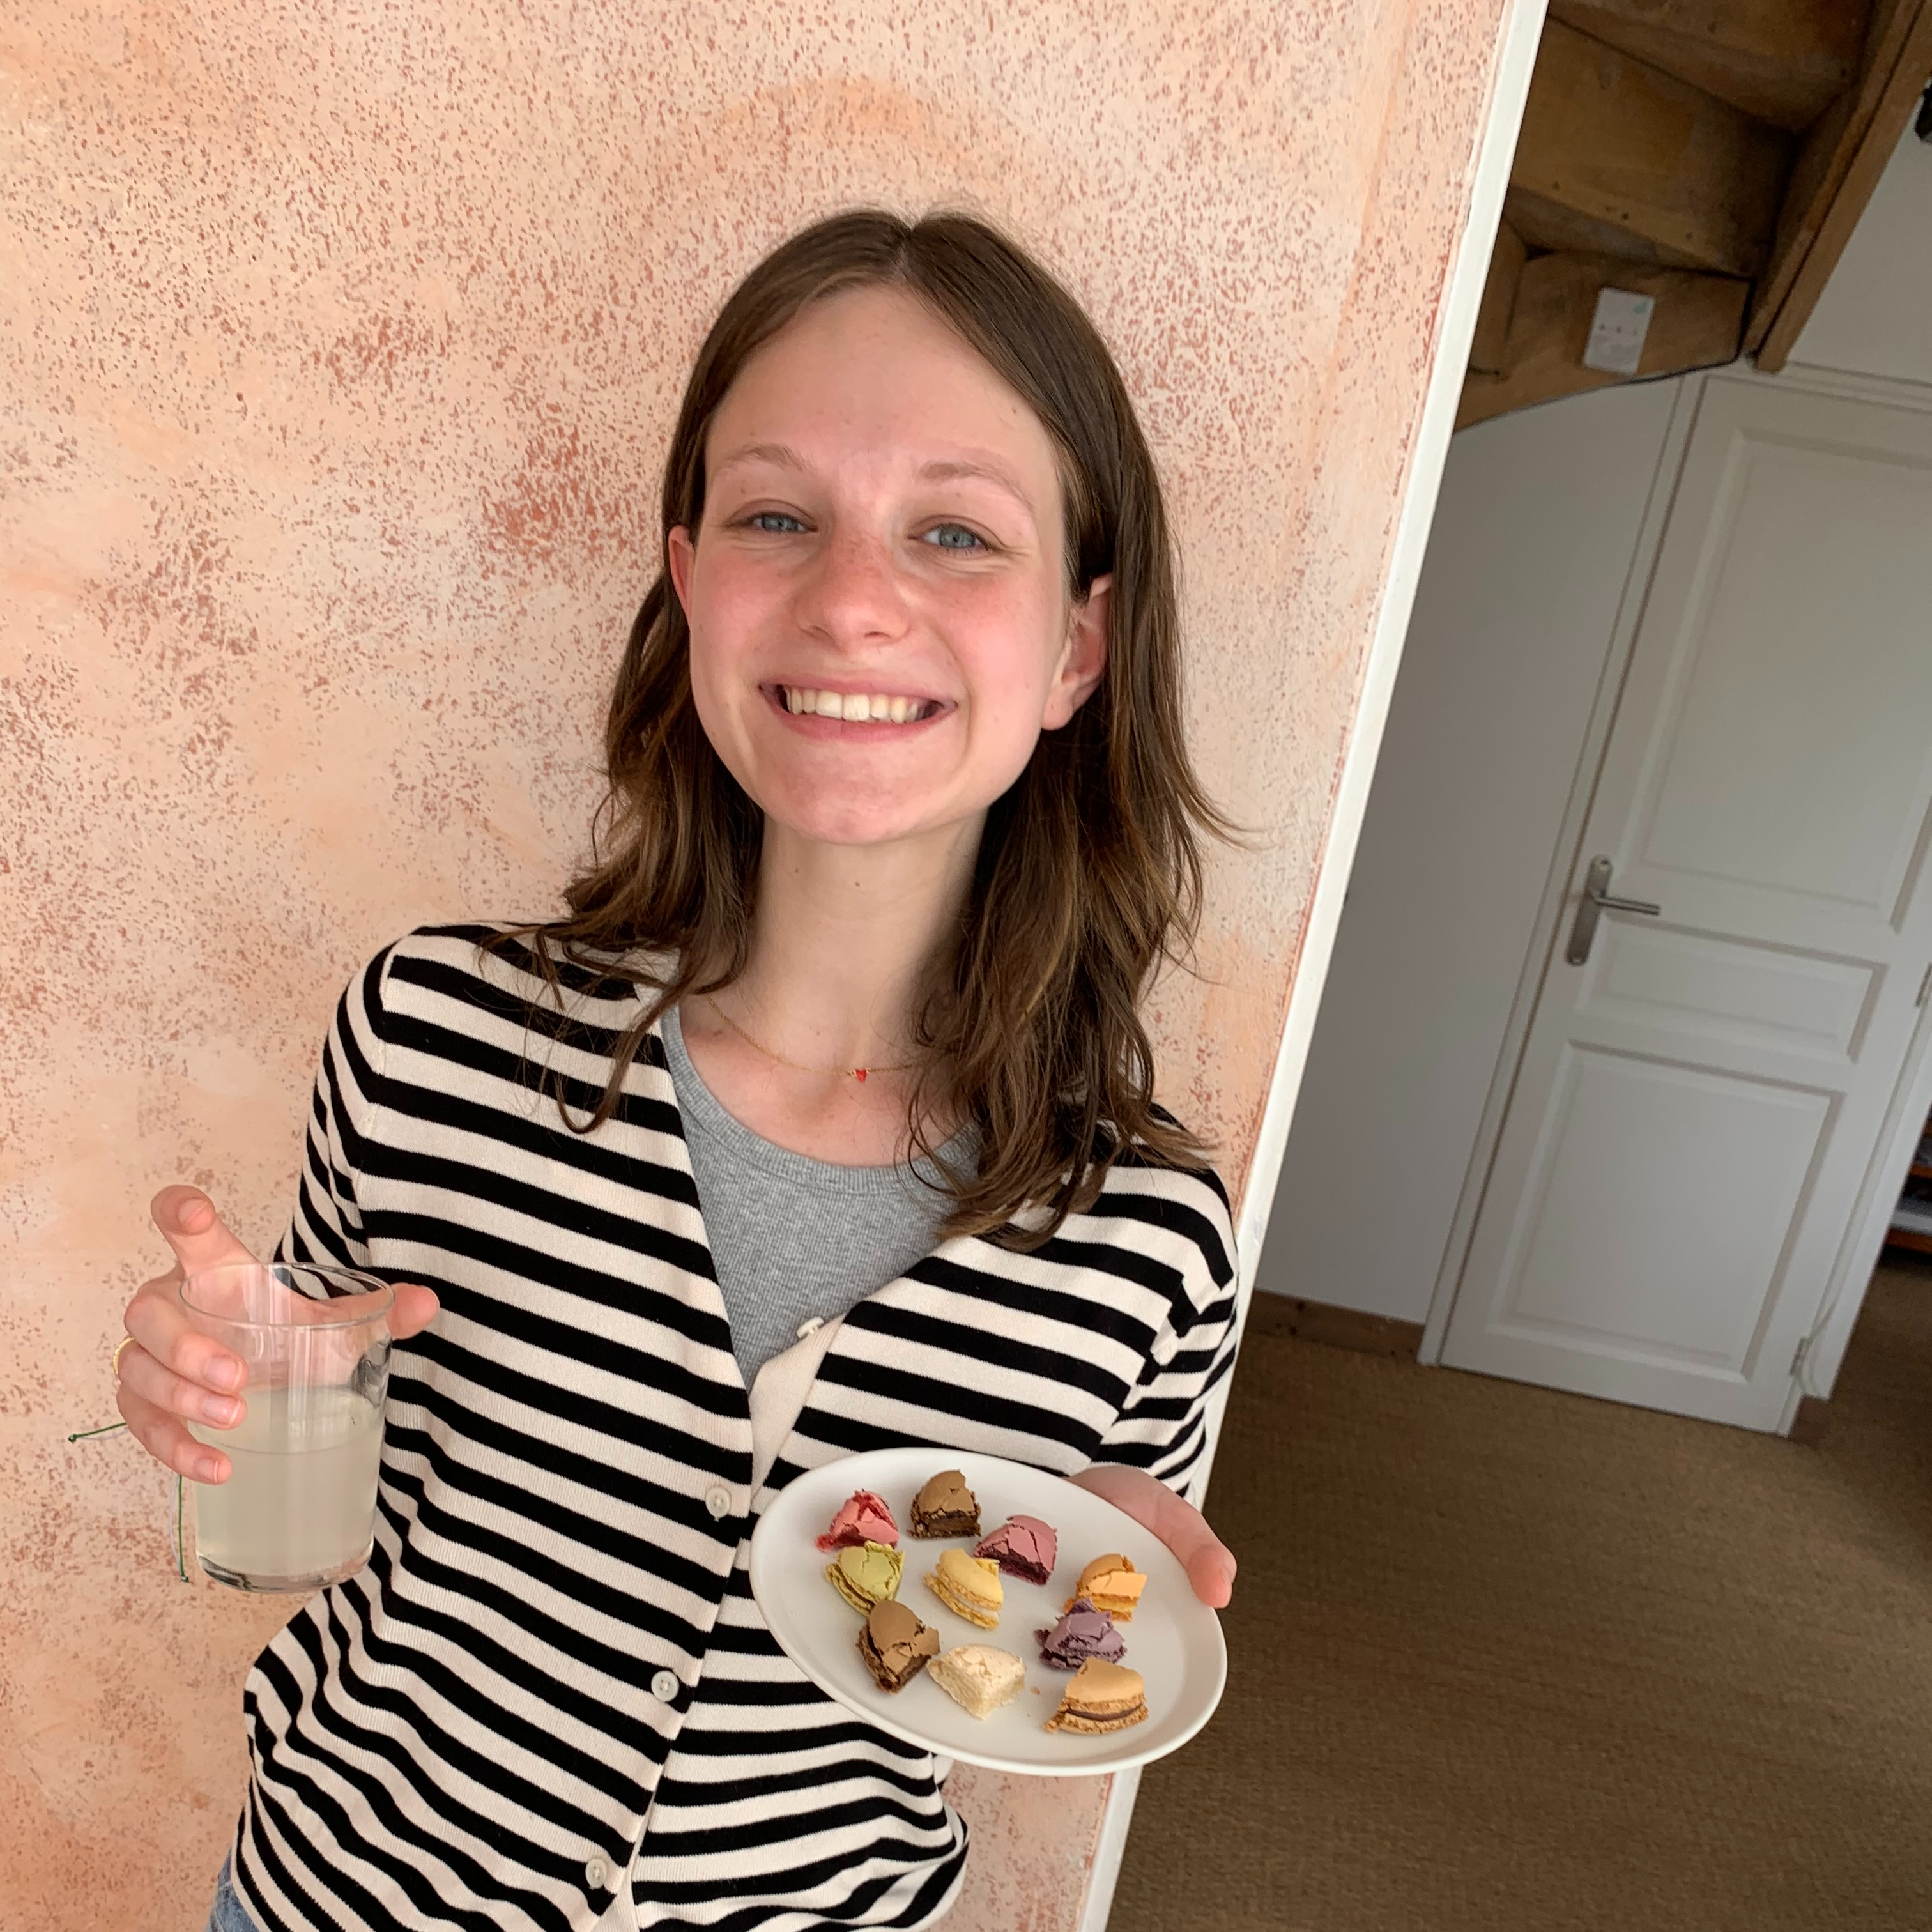 Student in Tours, France with a plate of macaroons